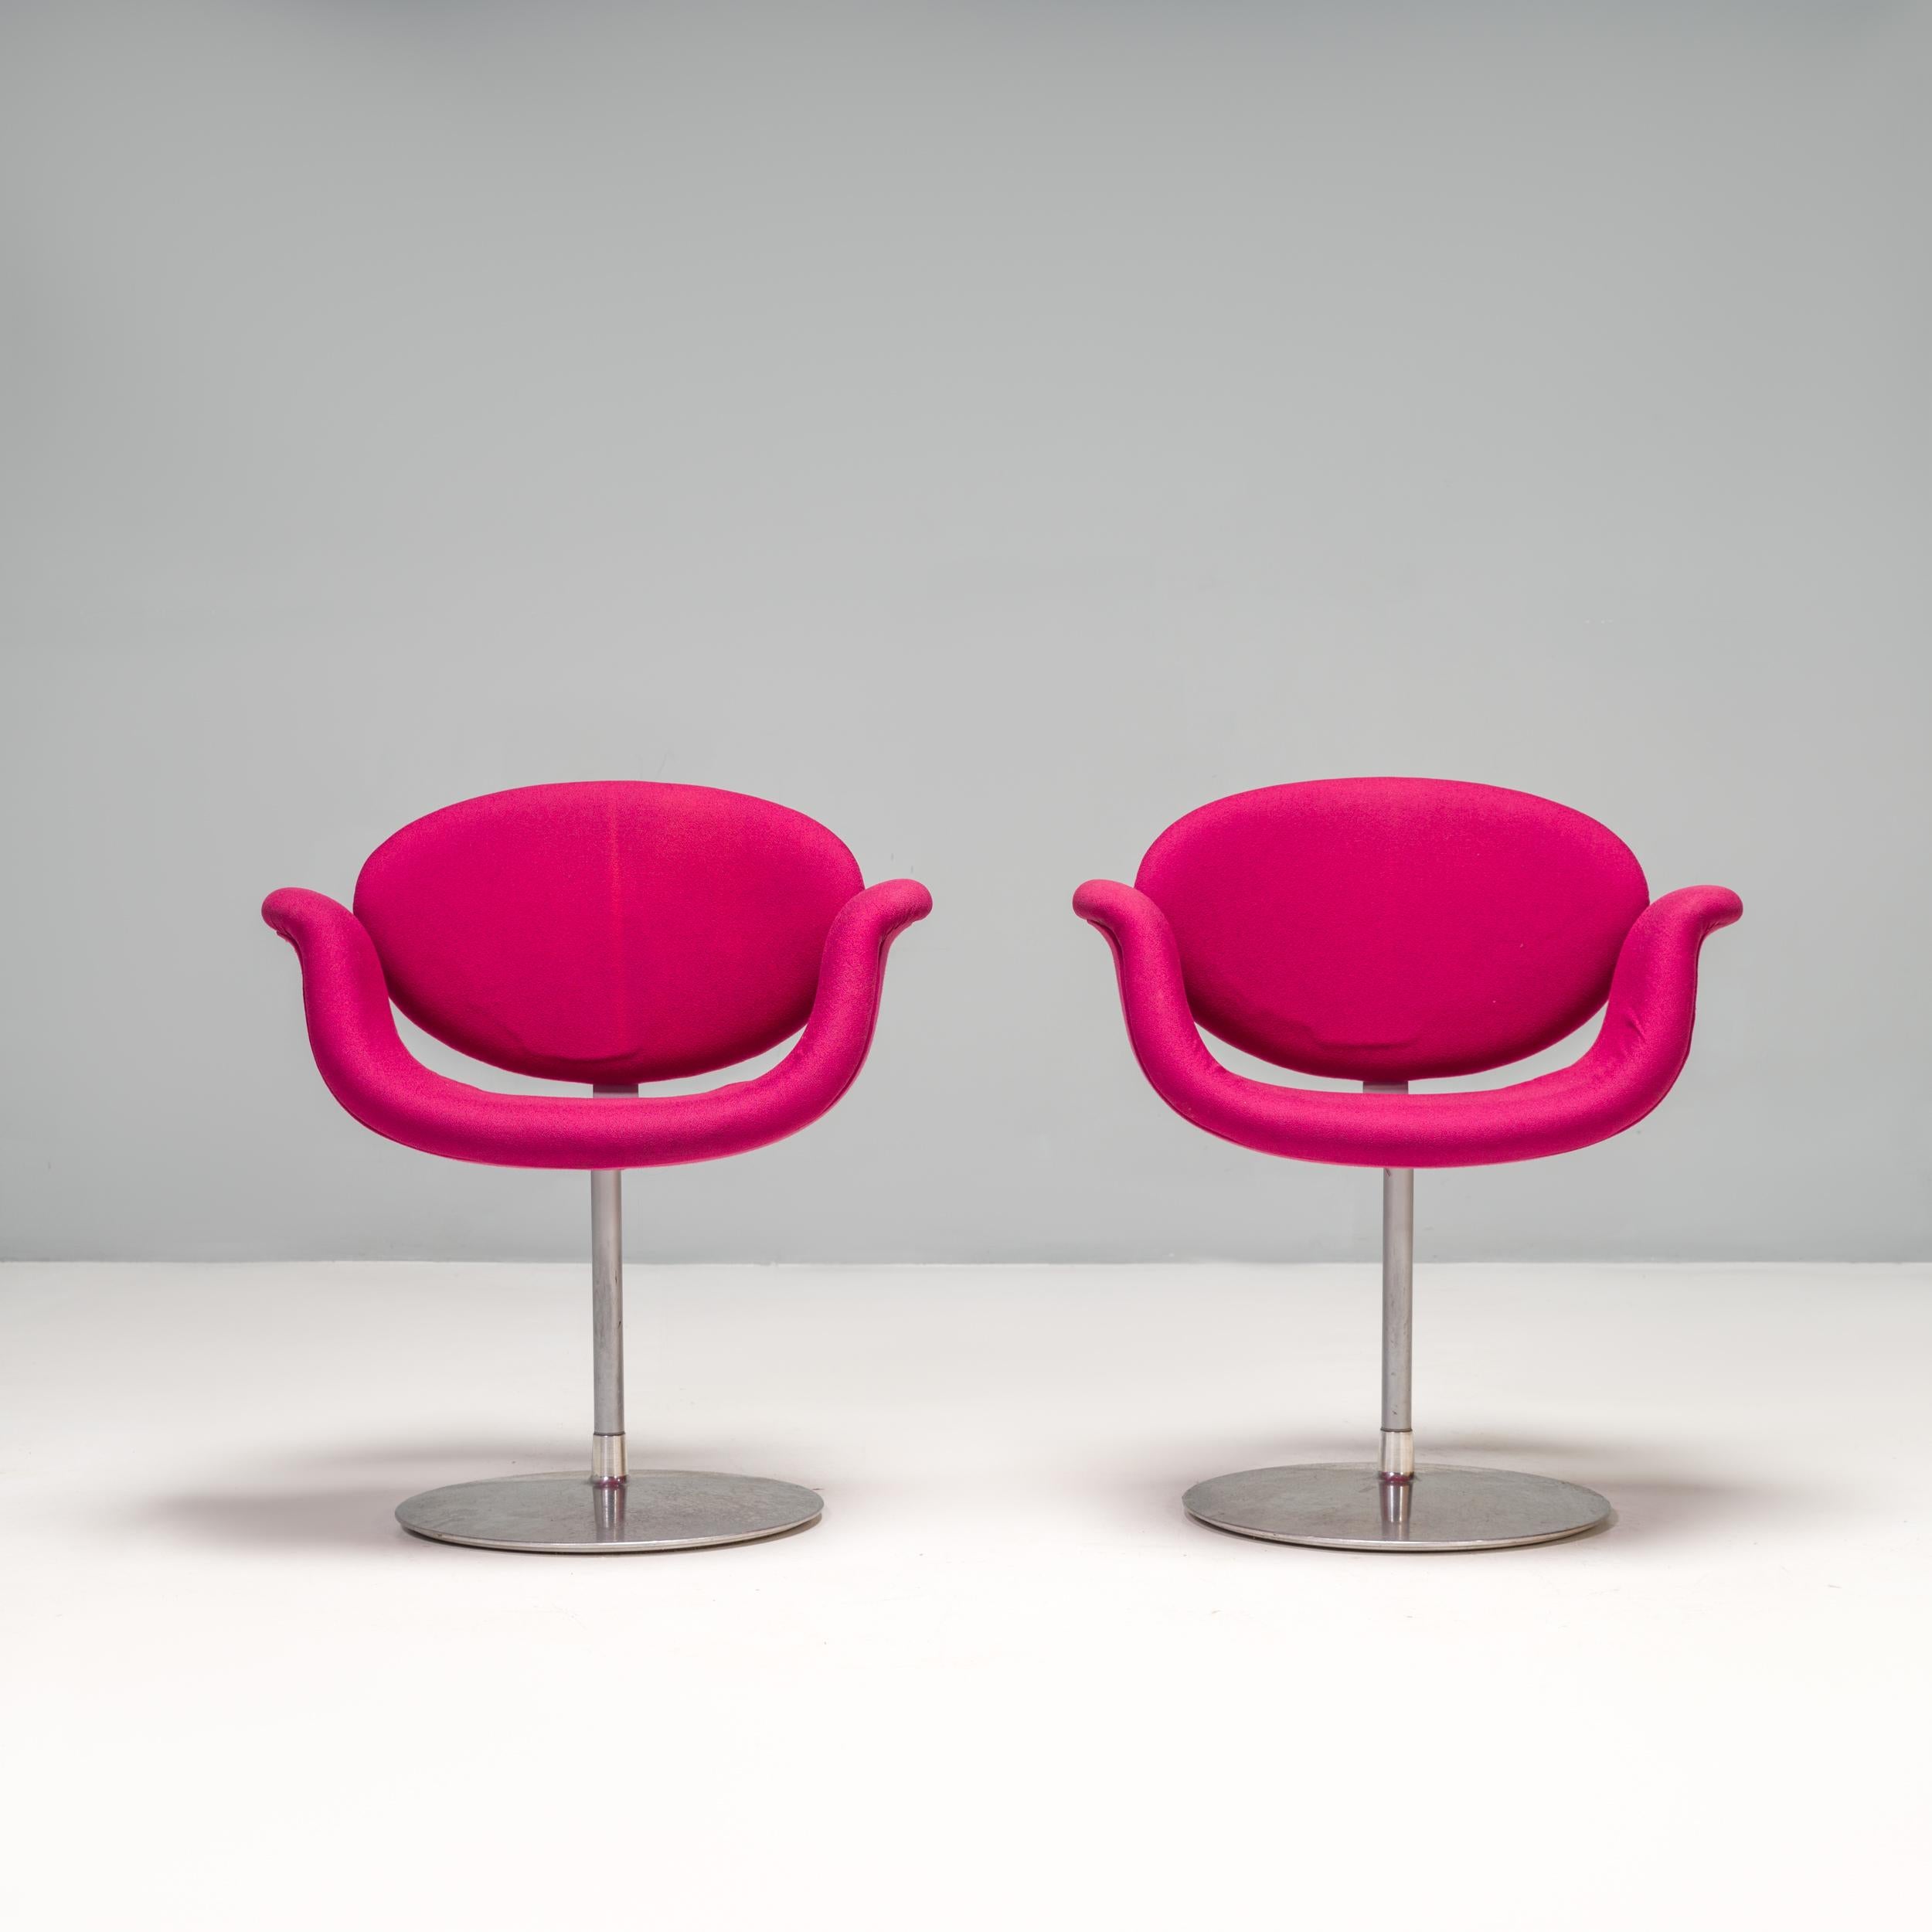 Originally designed by Pierre Paulin in 1965, the Little Tulip chair is a design icon.

Inspired by the flower, the chair has a tulip-esque silhouette with a petal-shaped seat which curves out to create armrests.

Upholstered in pink fabric, the